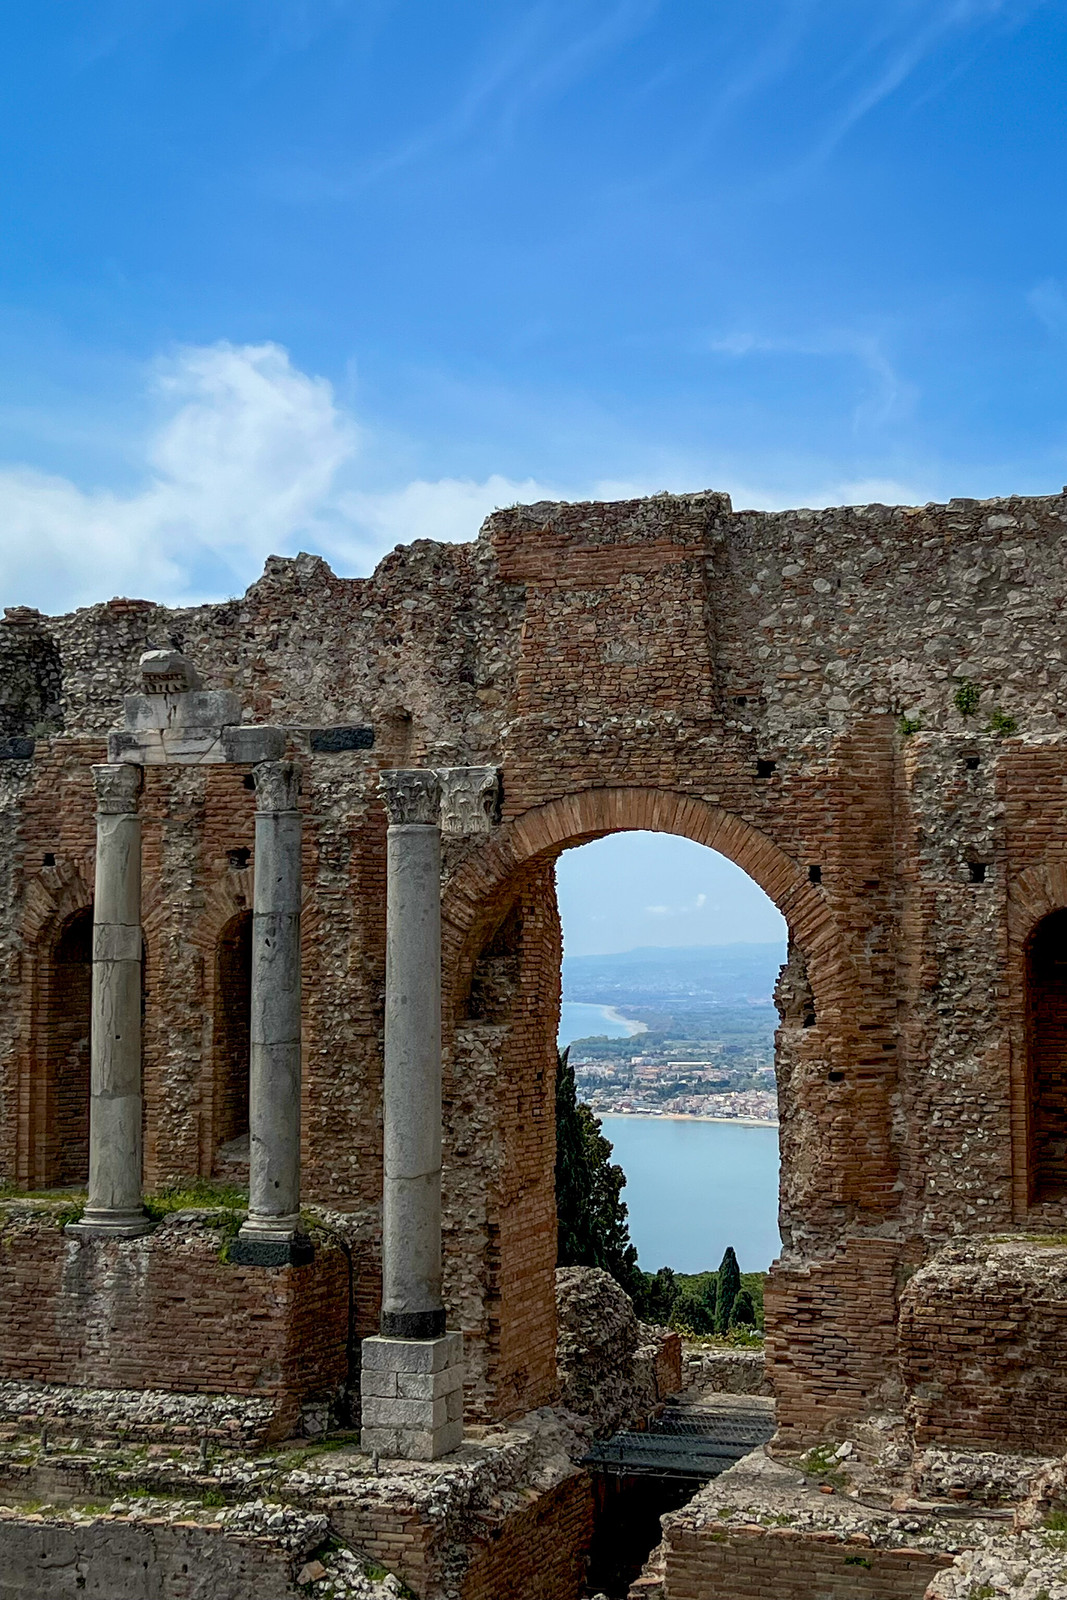 Visit Teatro Antico di Taormina | Taormina, Sicily Travel Guide | What to See, Do and Eat in Taormina | Where to stay in Taormina | Discover the Best Things to do in Taormina, Sicily, Italy | Visit Sicily | Sicily Food | Sicily Travel Tips